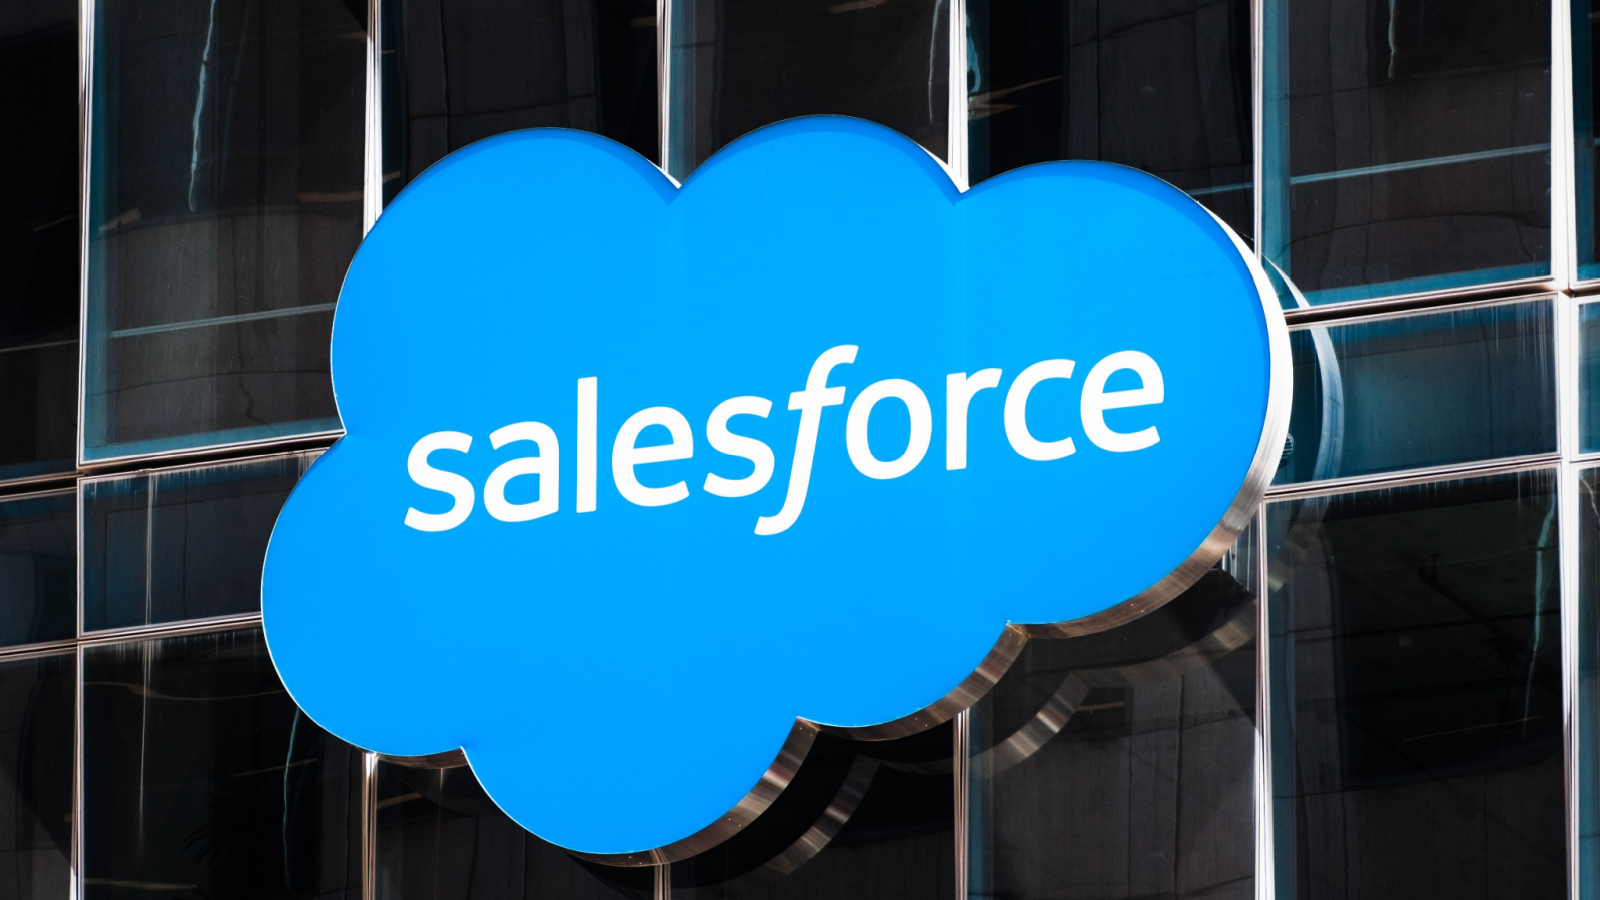 These 2 Salesforce Insiders Just Sold 25,000 Shares of CRM Stock